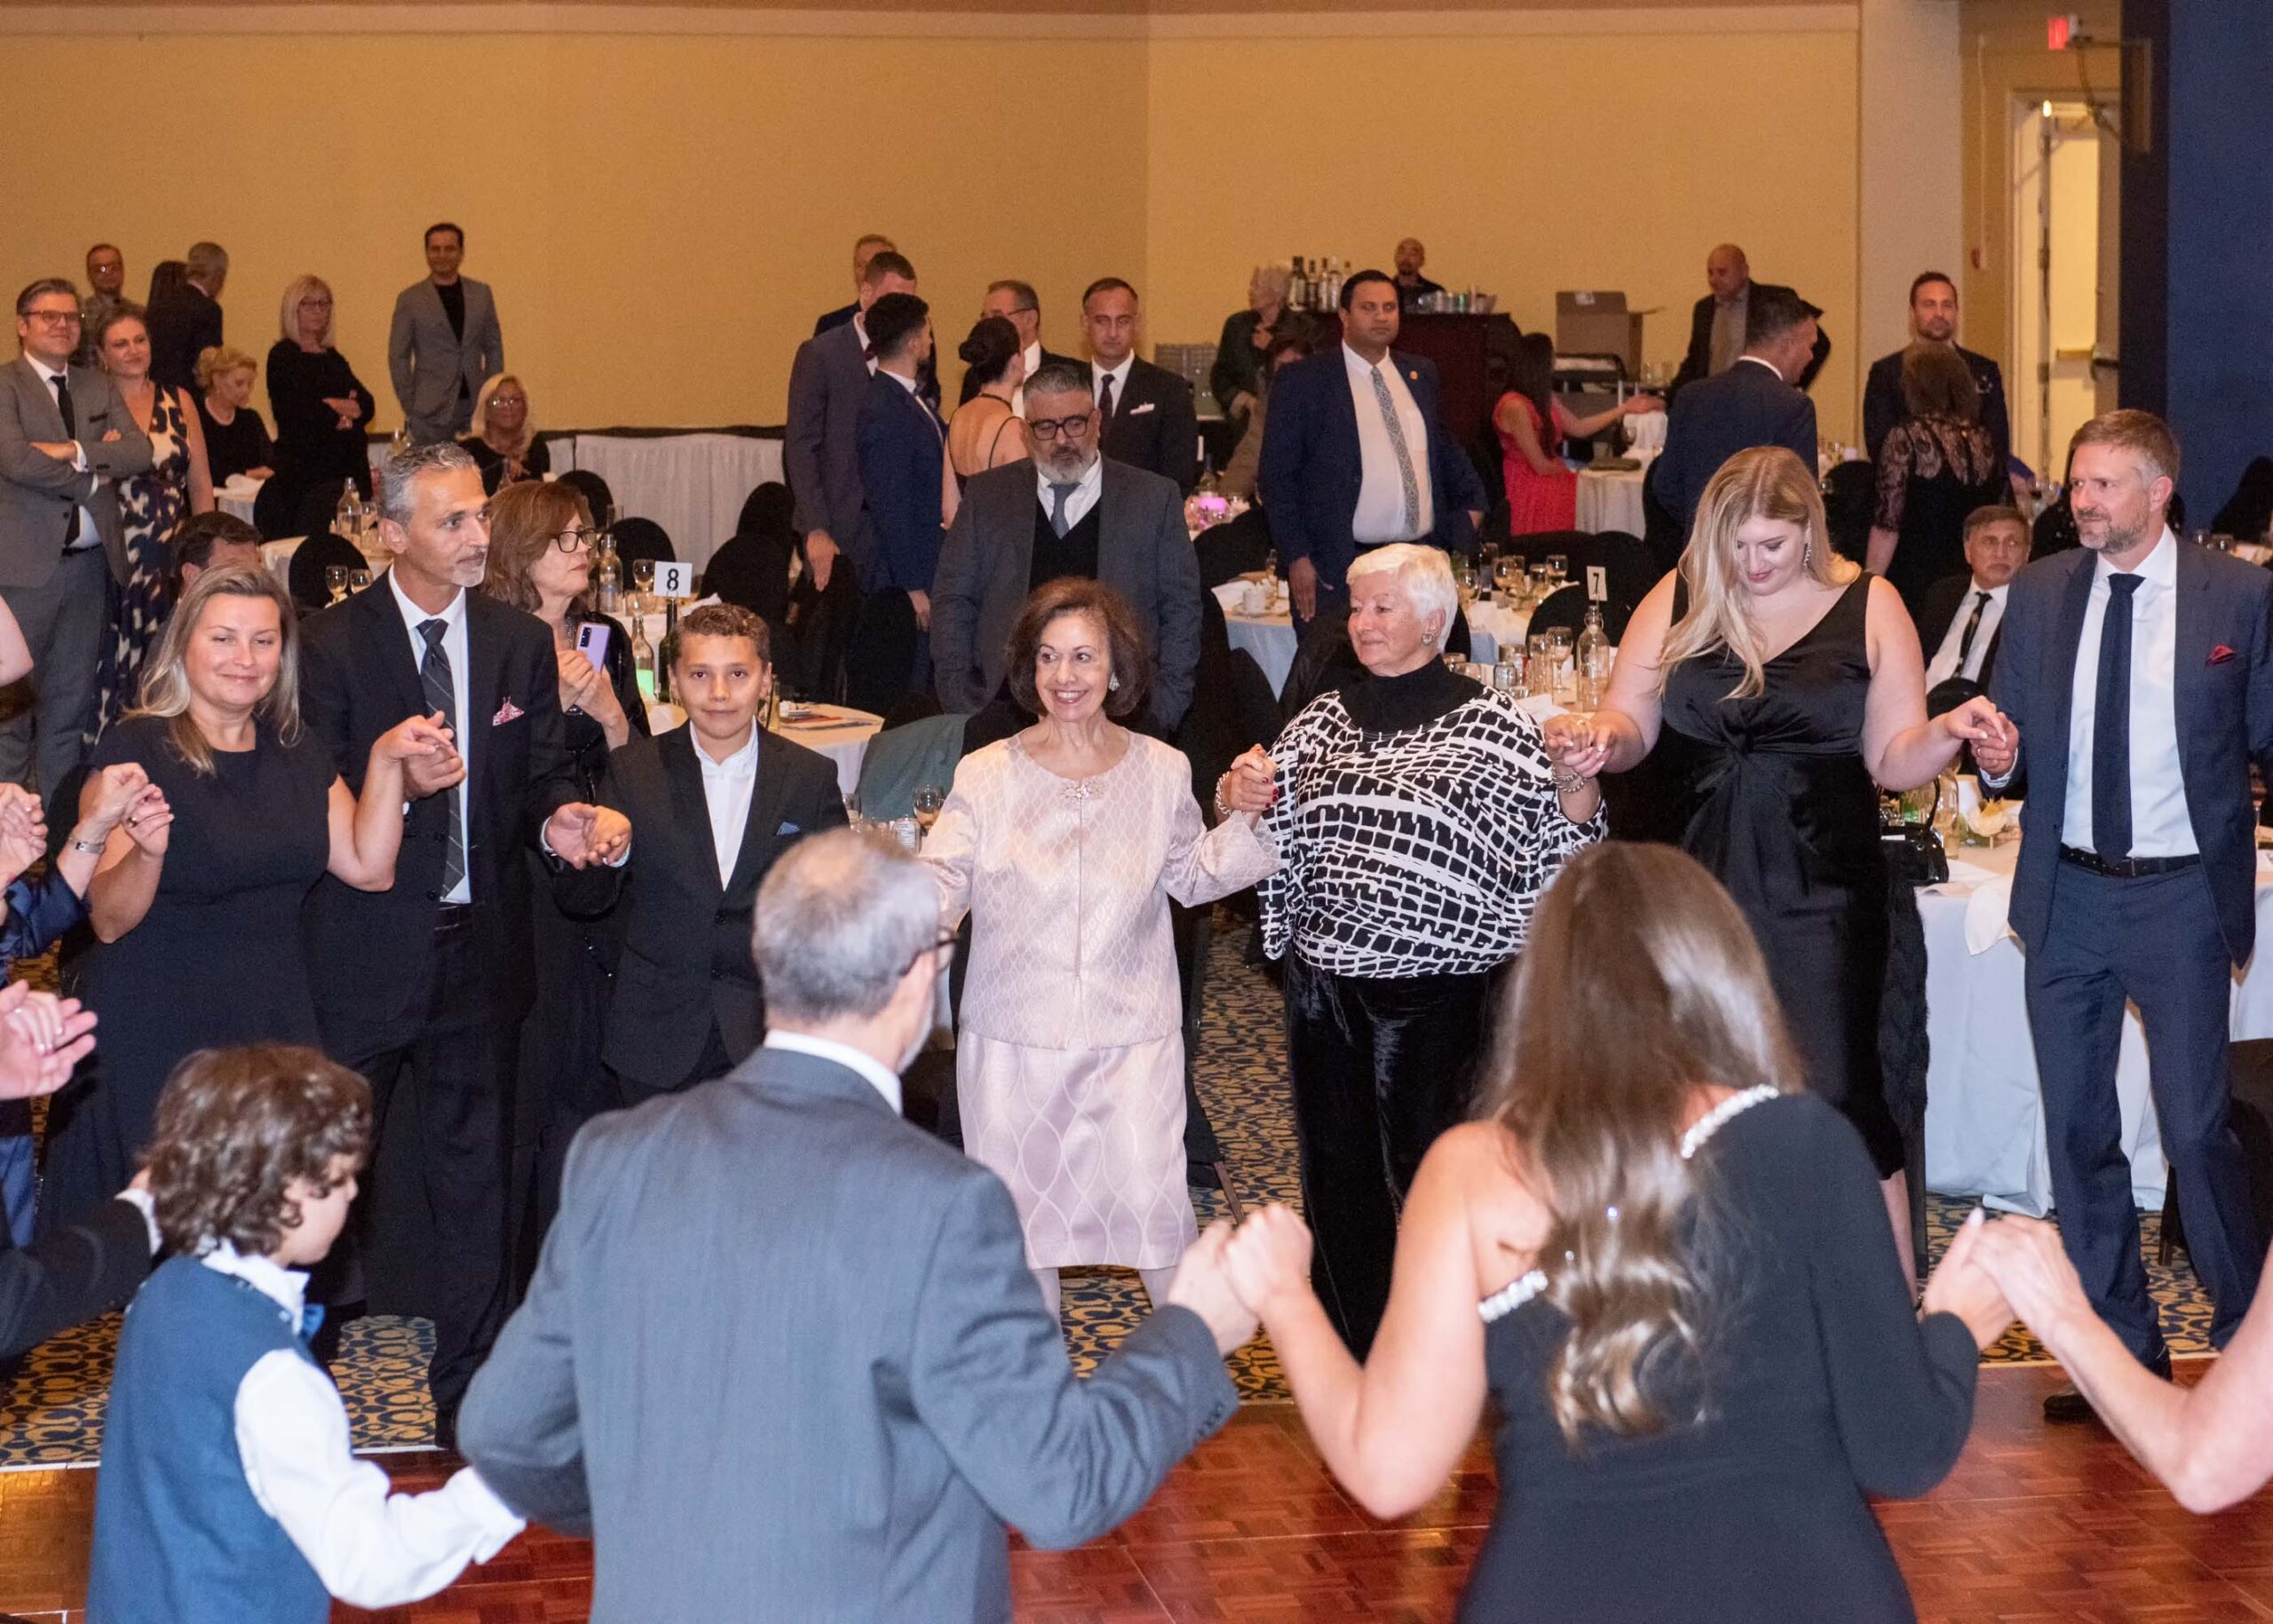 HRH Crown Princess Katherine dancing “King’s Kolo” at Lifeline Canada charity in Toronto, Lily Markovic Photography